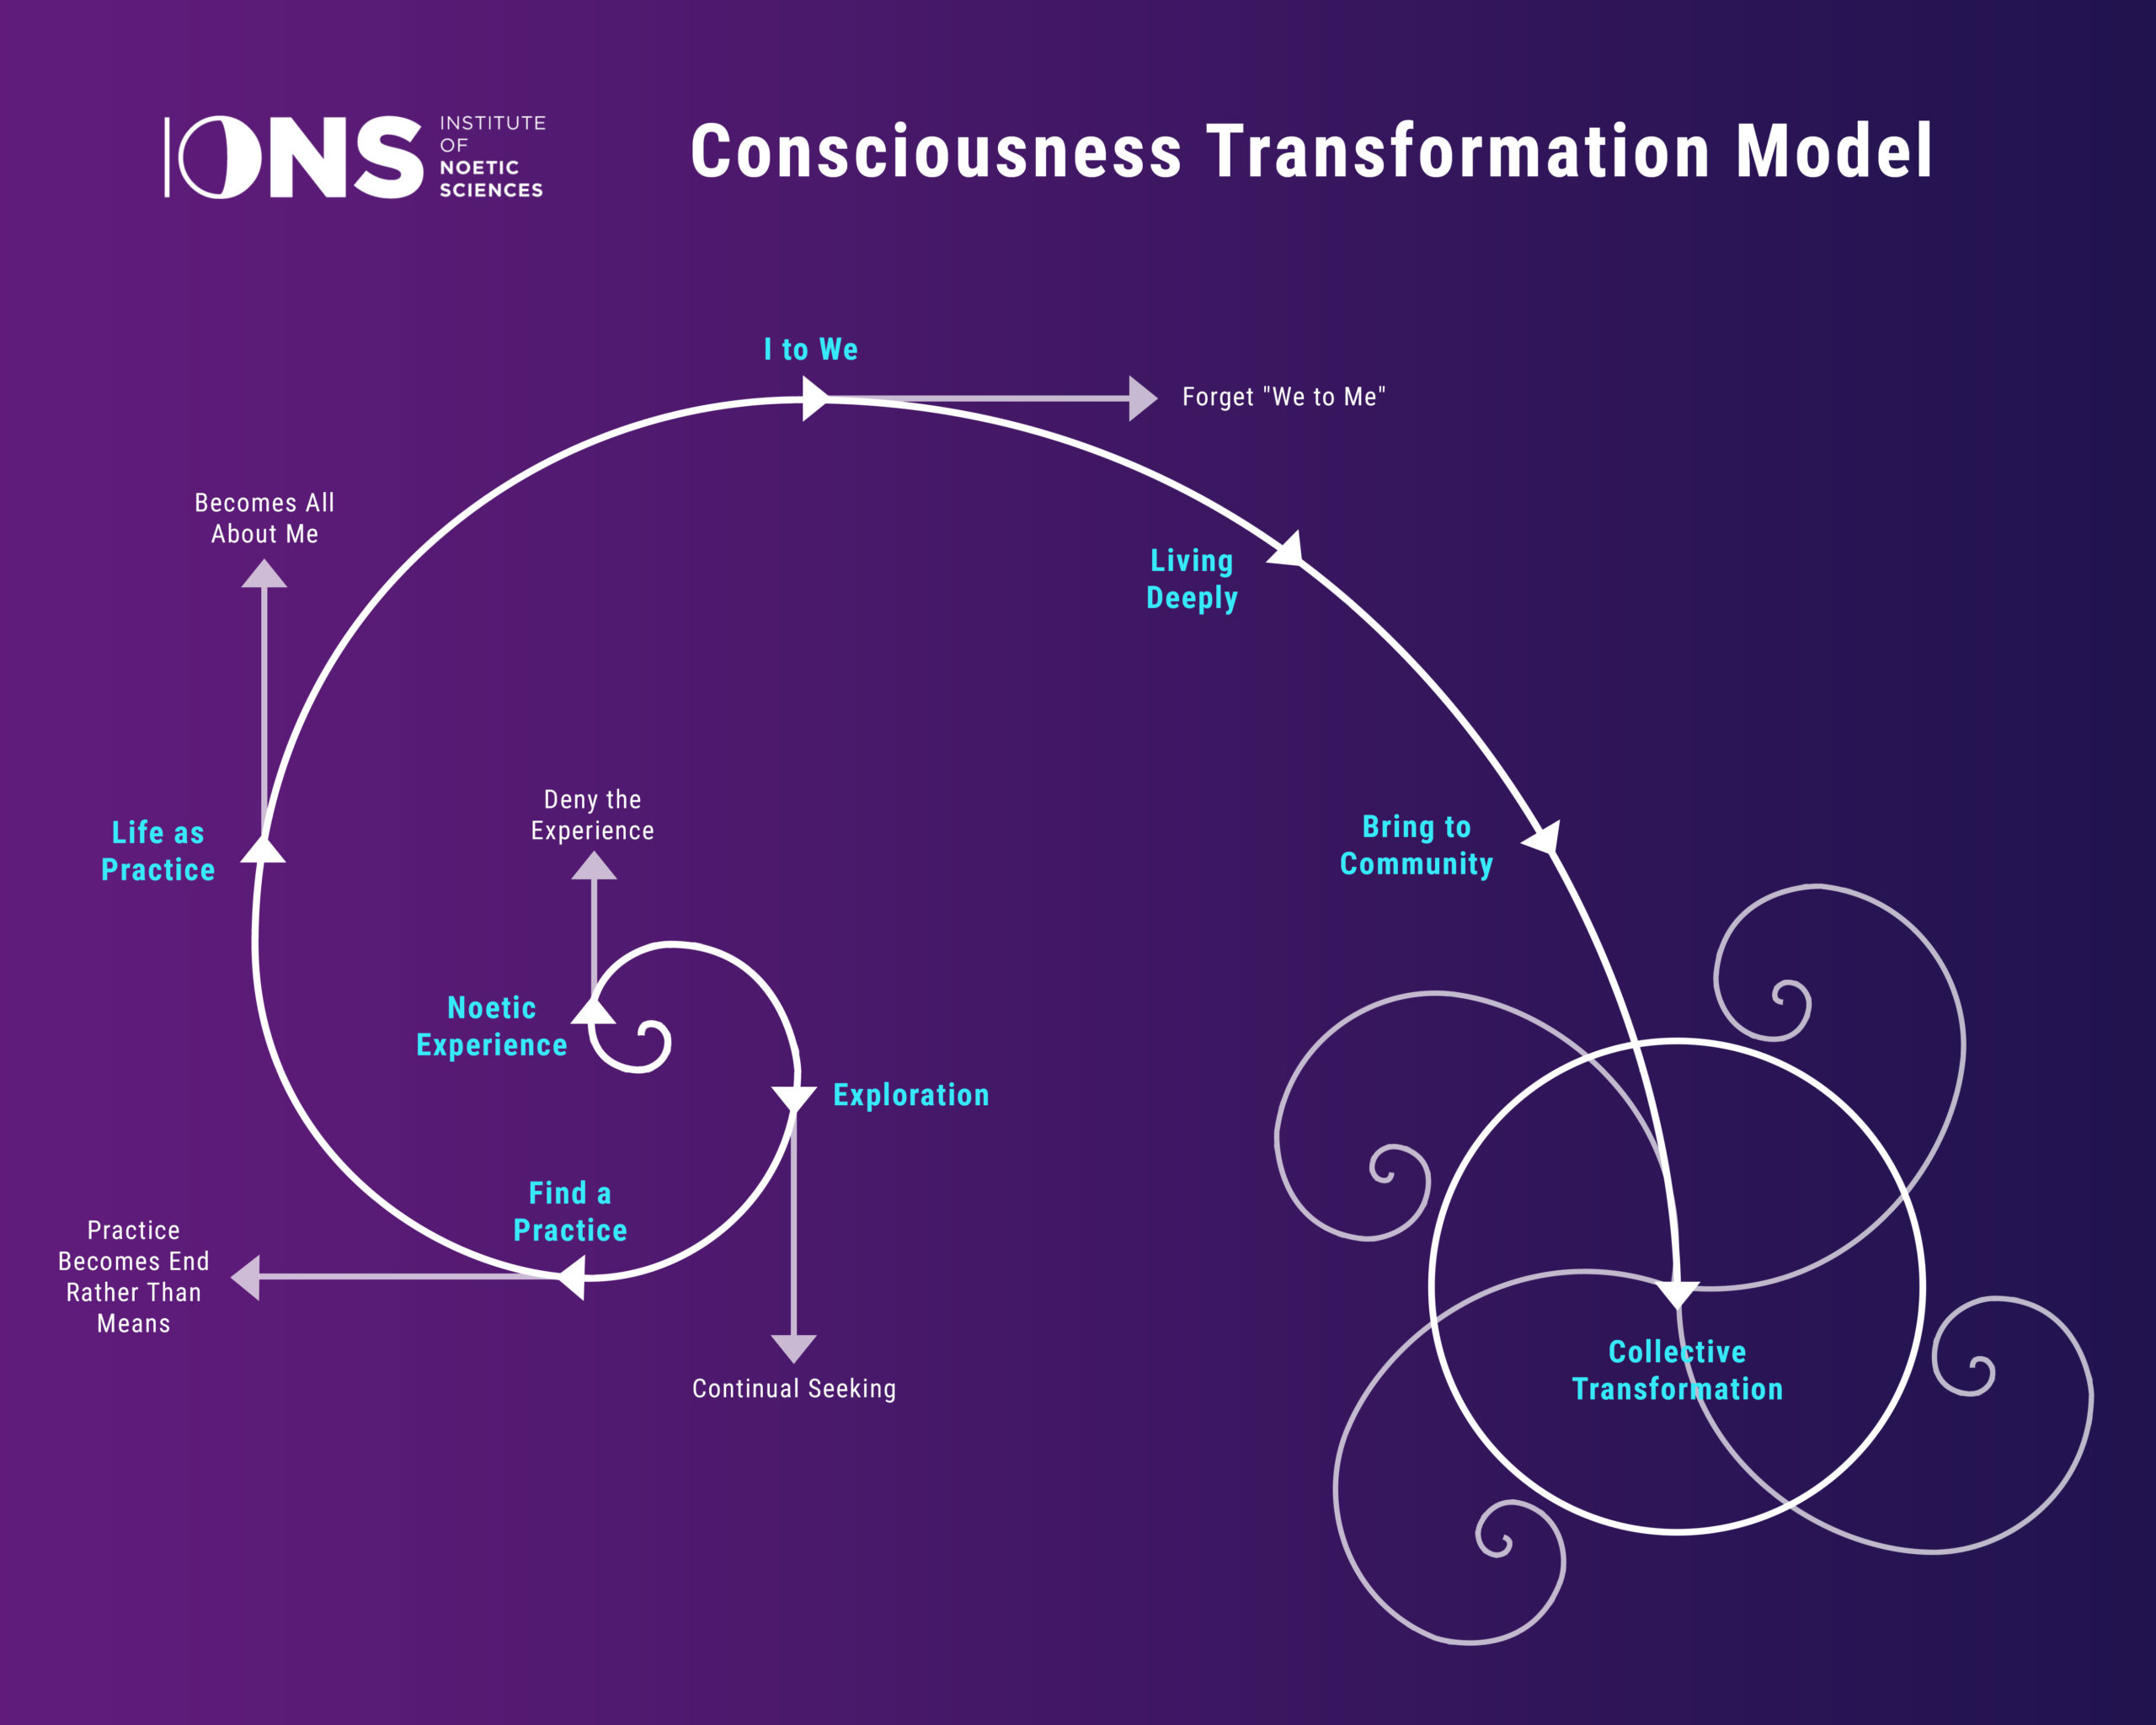 IONS Consciousness Transformation Model